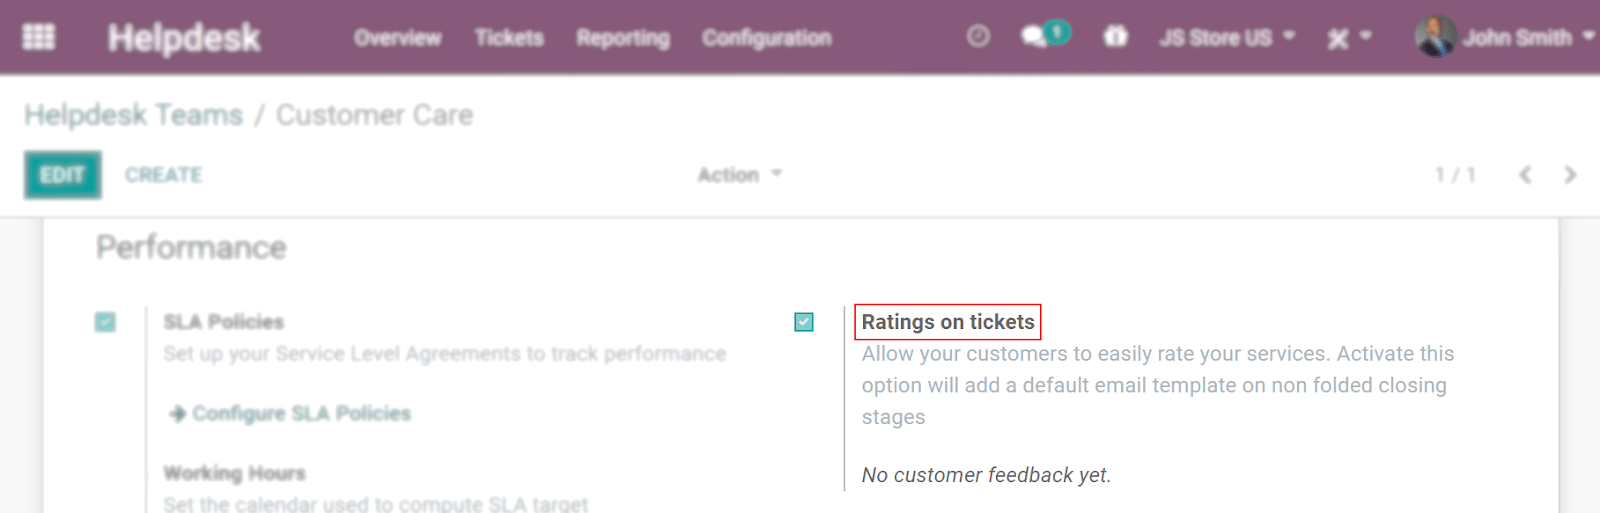 Overview of the settings page of a helpdesk team emphasizing the rating on ticket feature in CoquiAPPs Helpdesk